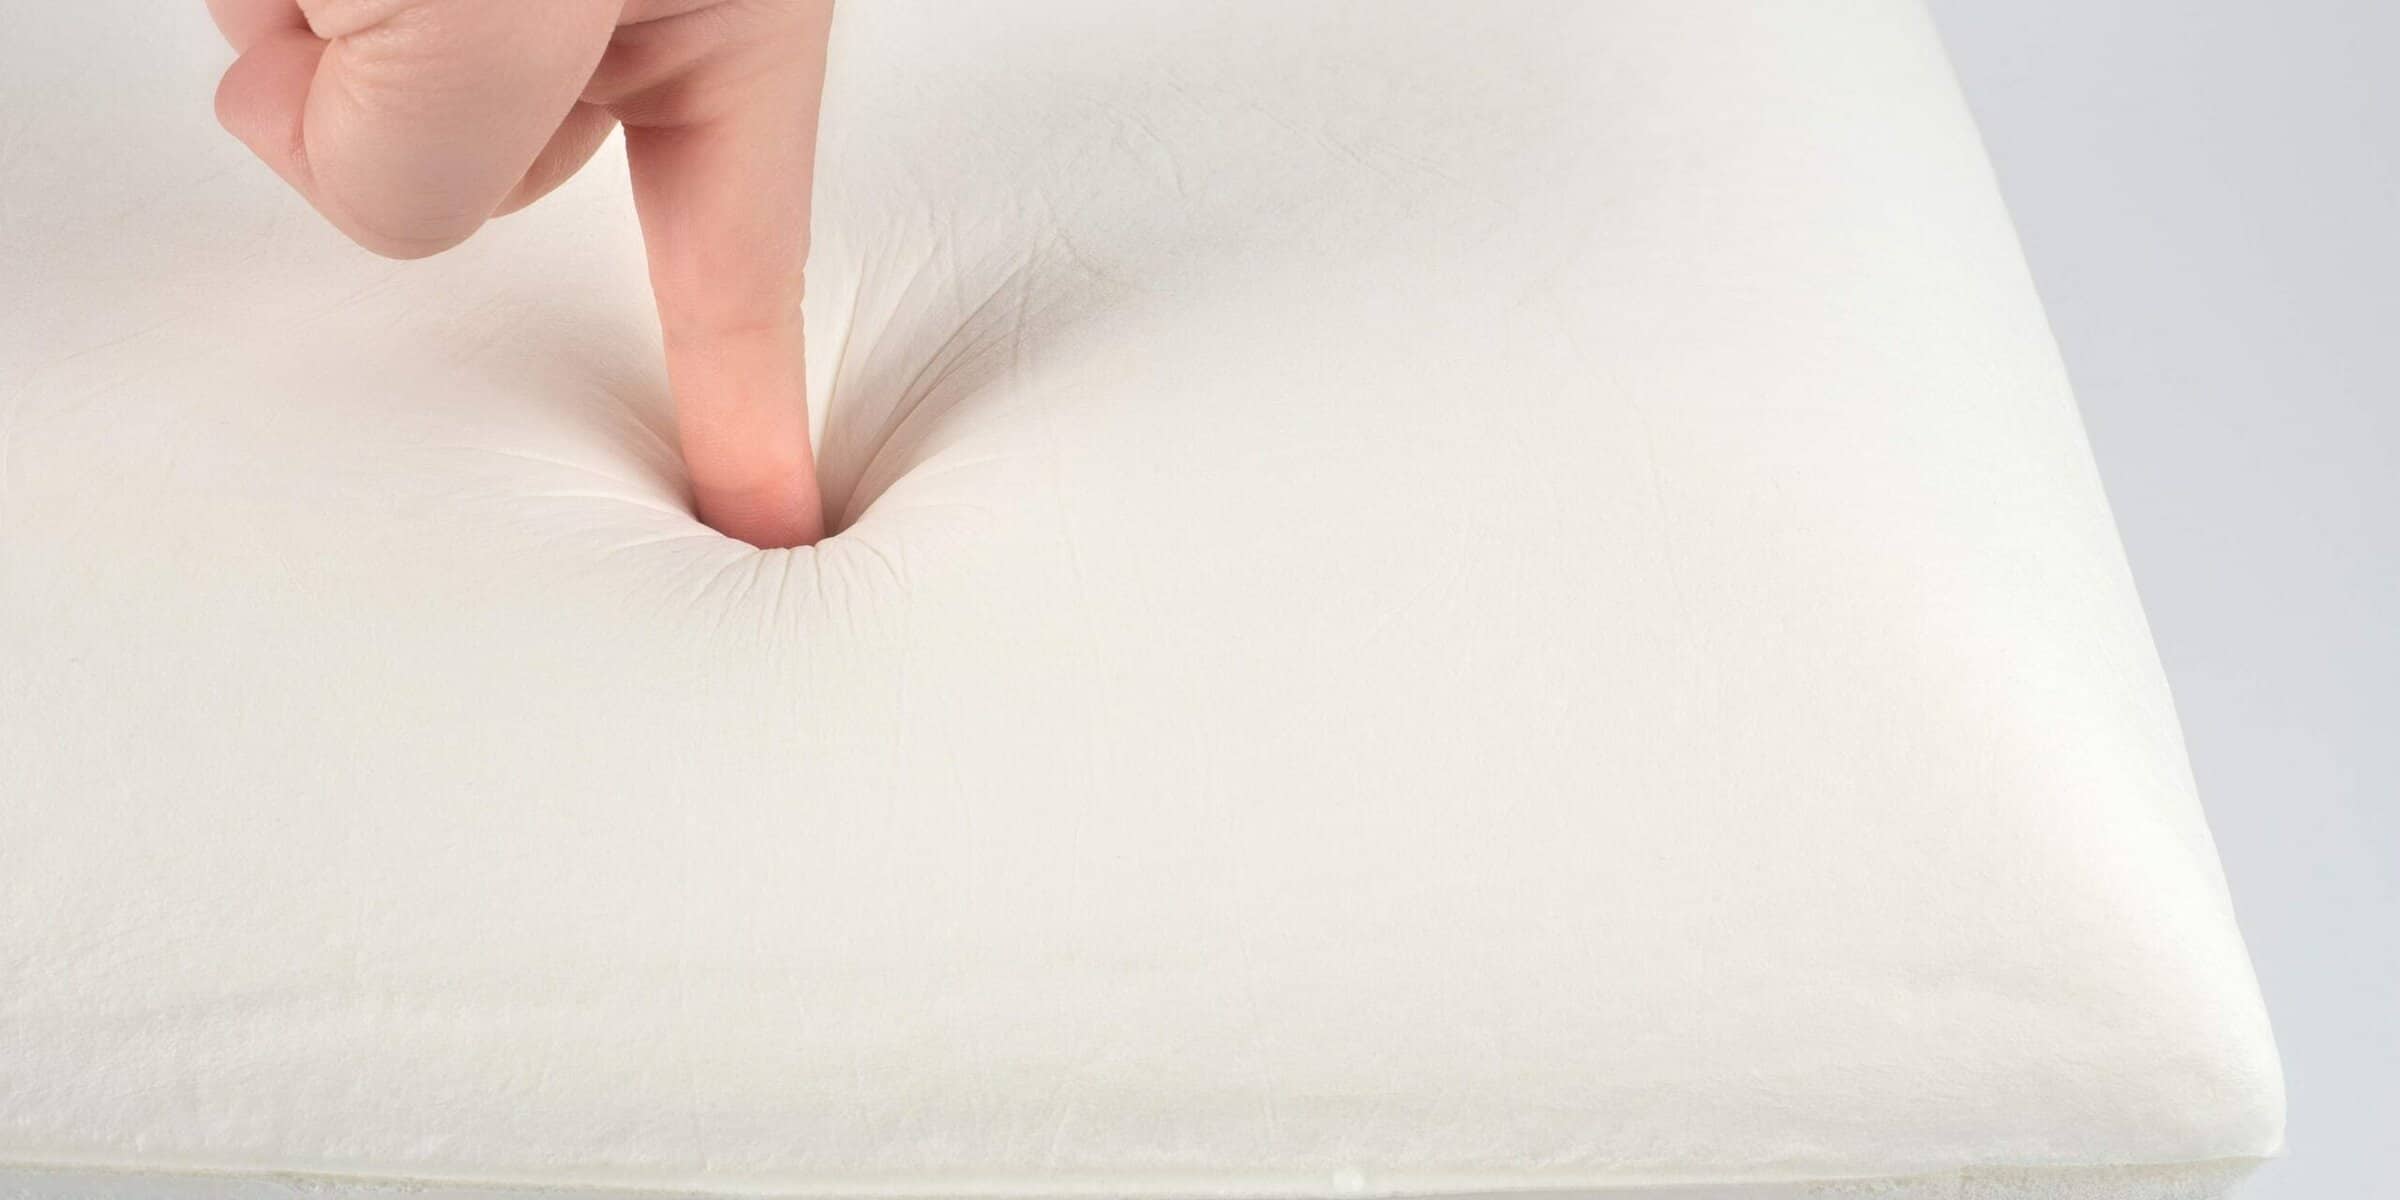 How to Wash a Shredded Memory Foam Pillow